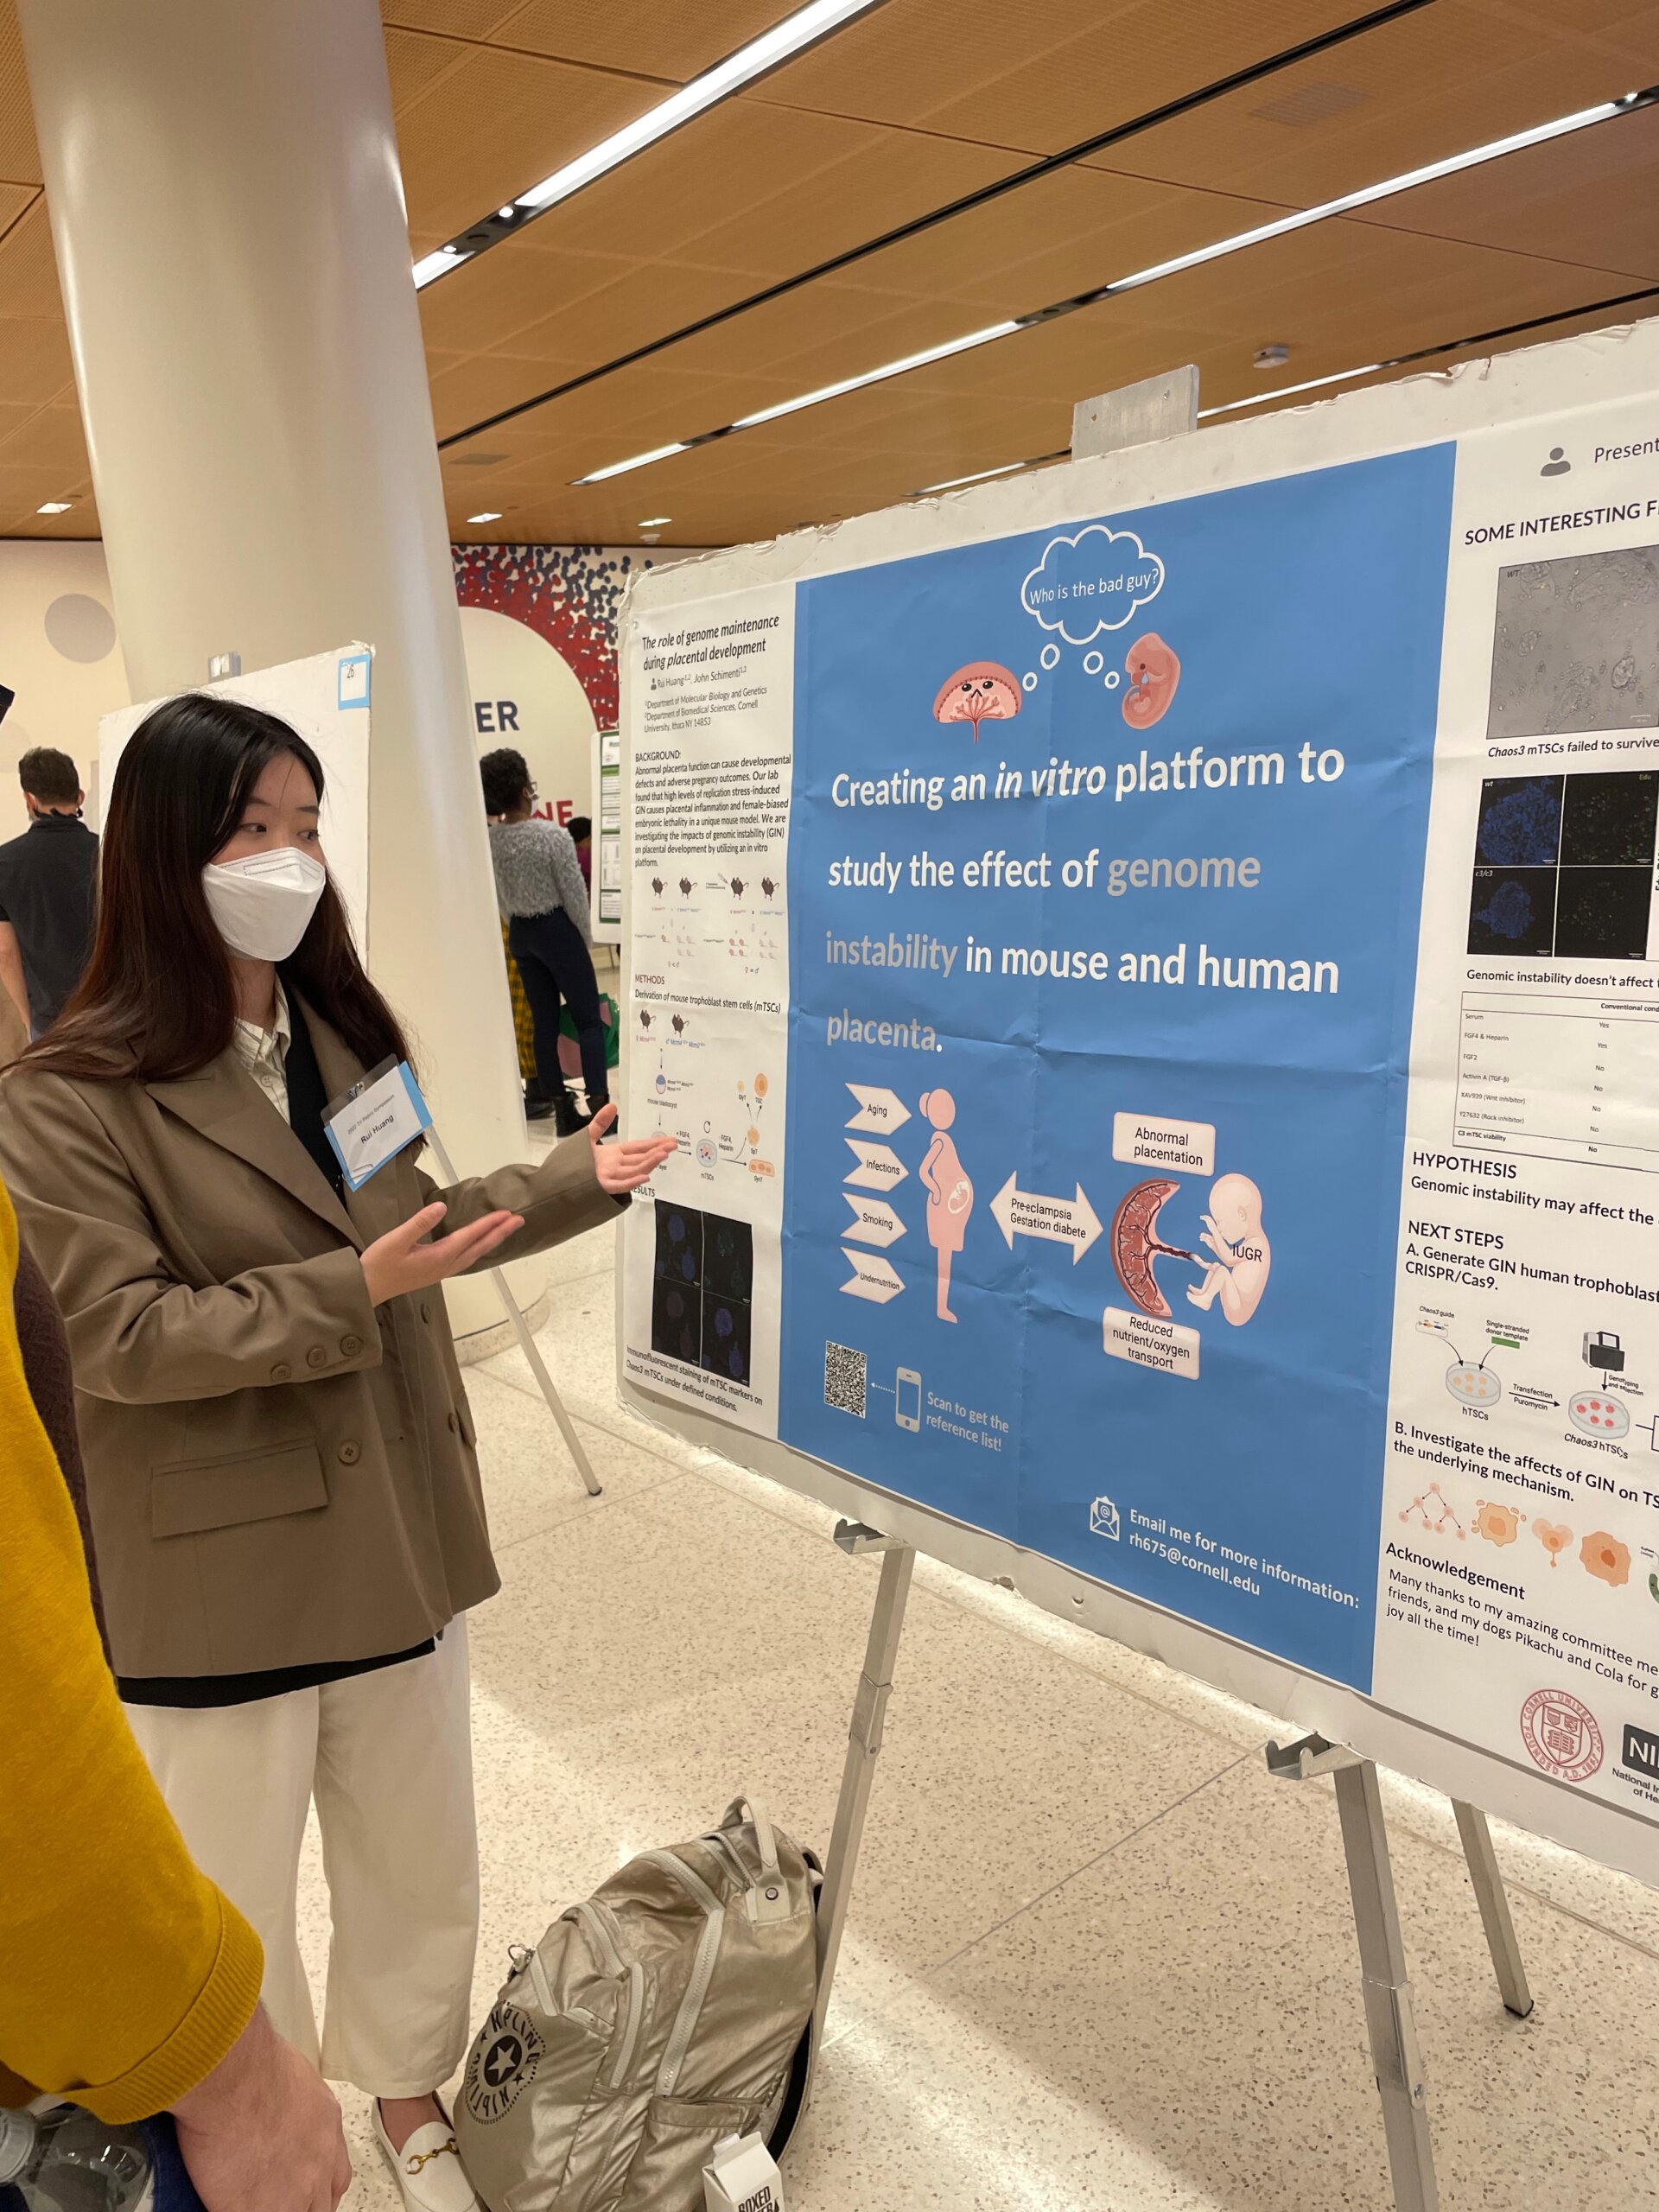 Dr. Rui Huang standing in front of and discussing “Creating an in vitro platform to study the effect of genome instability in mouse and human placenta” poster